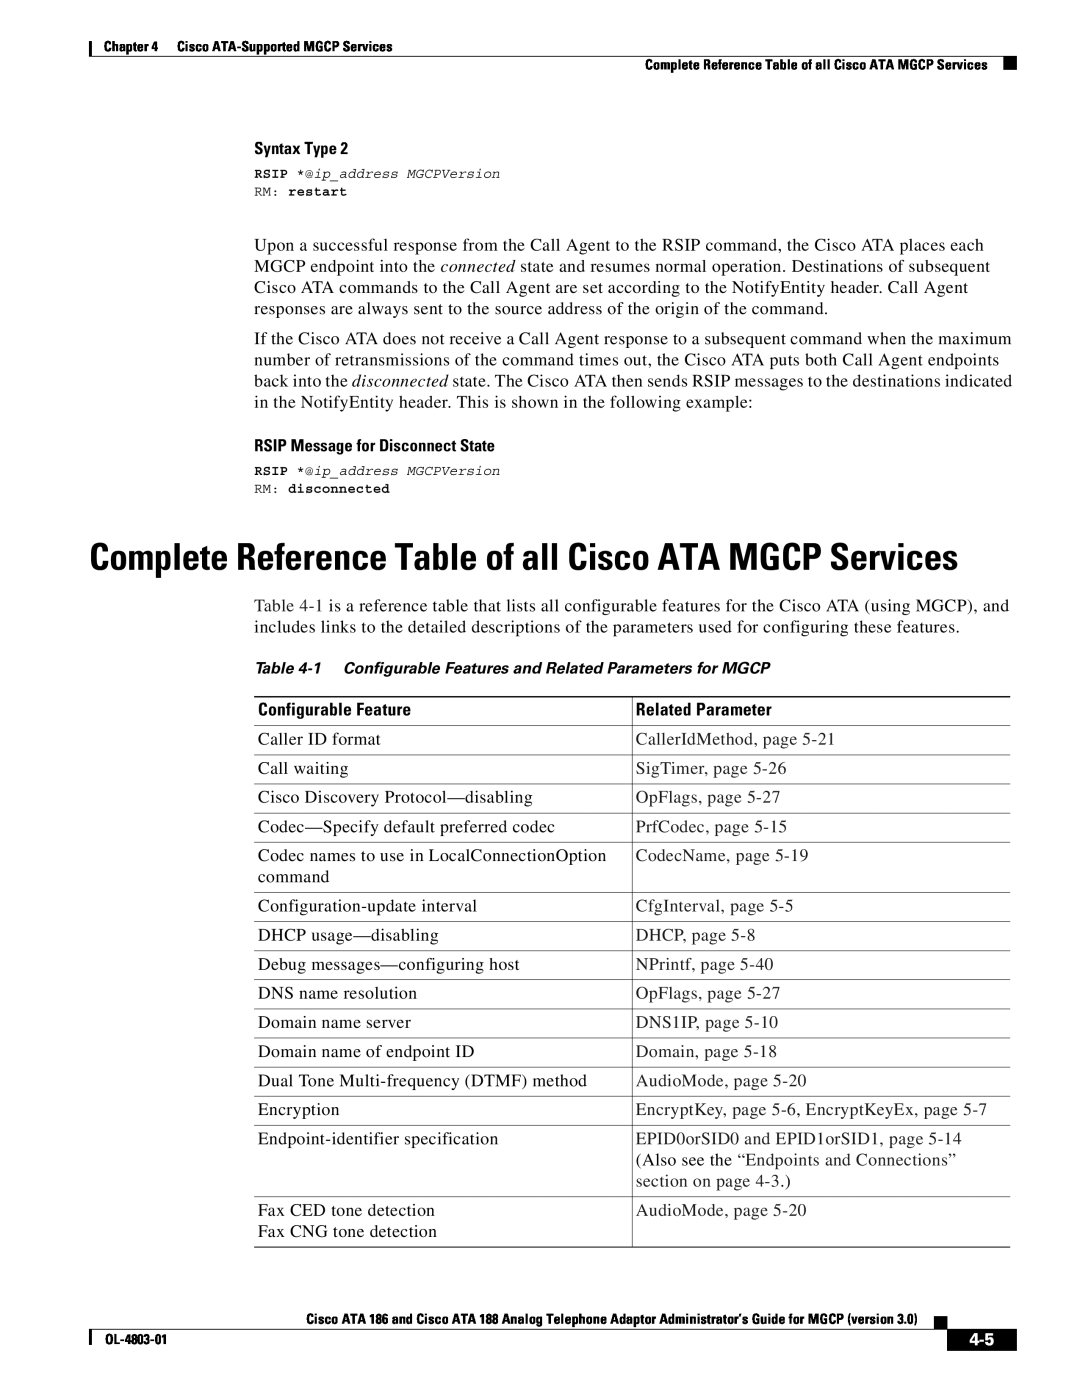 Cisco Systems ATA 188 Complete Reference Table of all Cisco ATA MGCP Services, RSIP Message for Disconnect State, command 